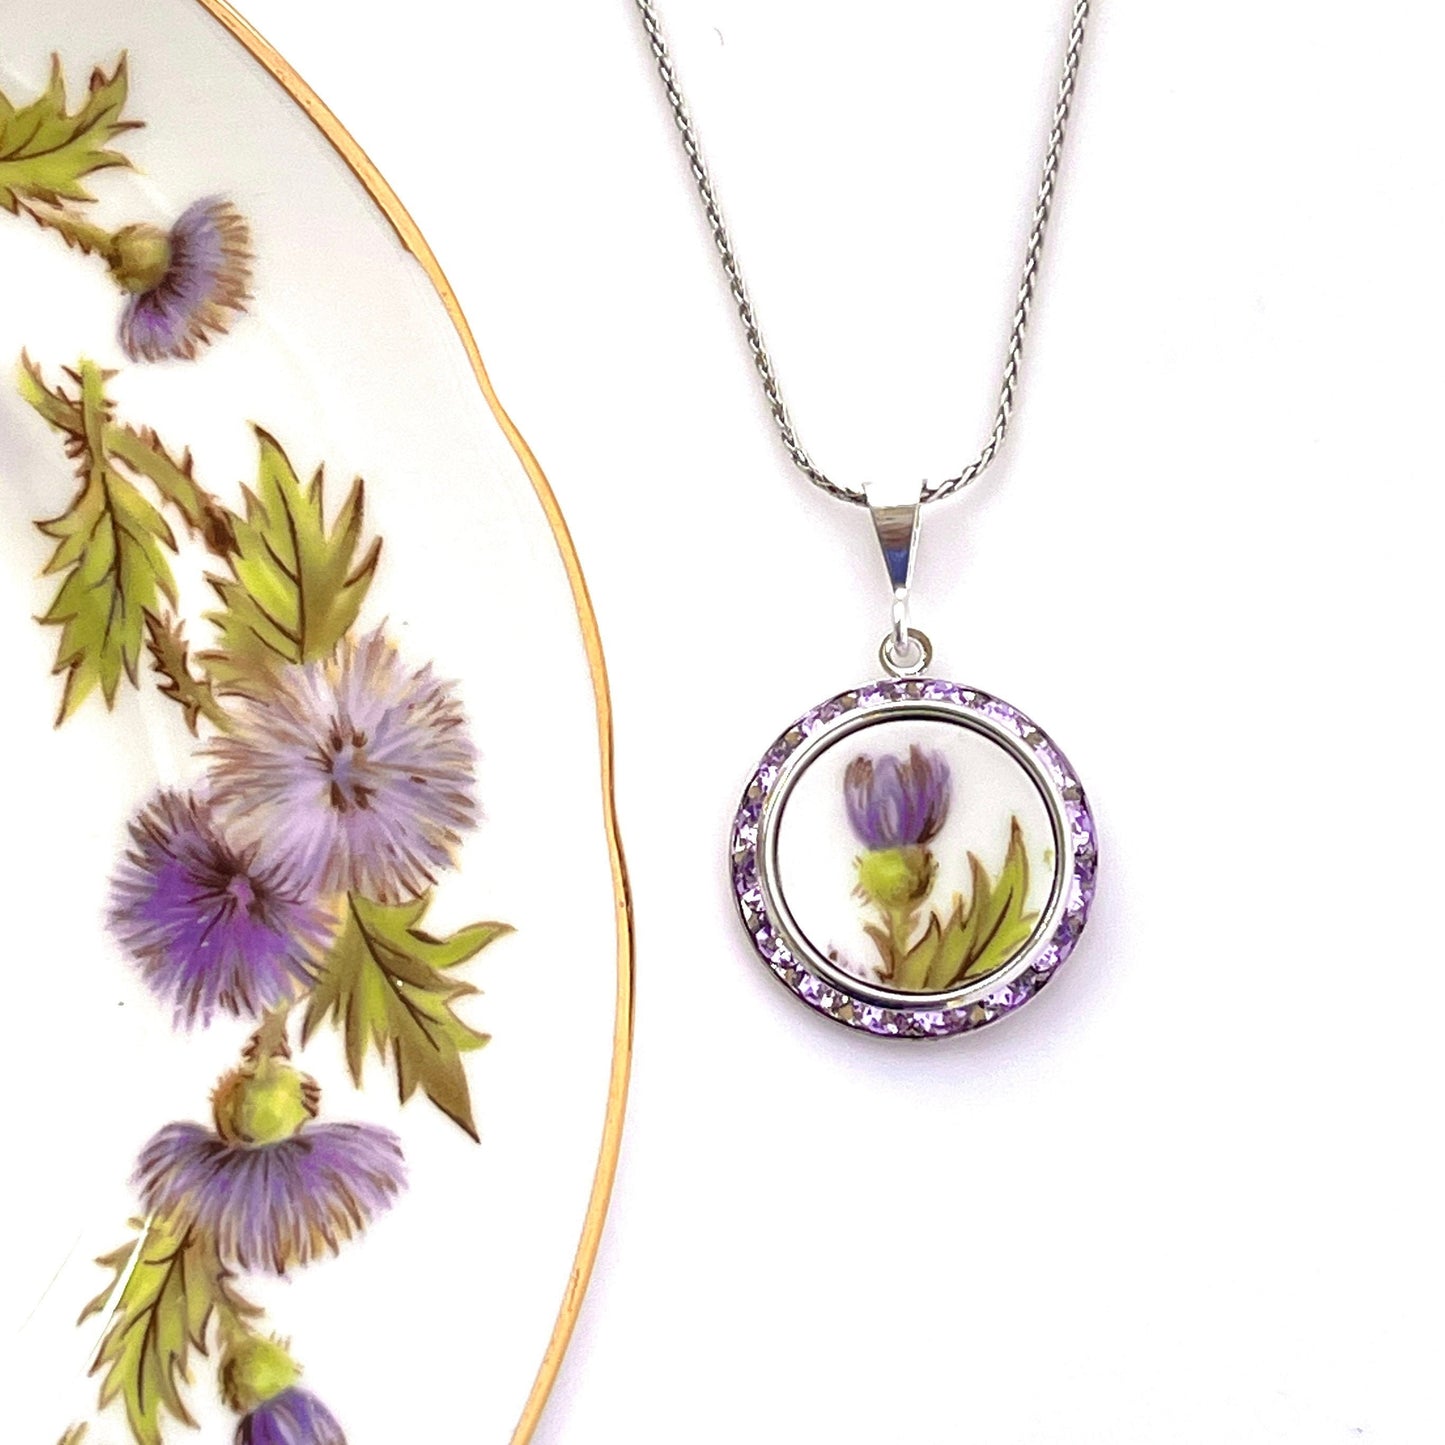 Scottish Thistle China Necklace, Unique Scottish Gifts for Women, Crystal Necklace, Broken China Jewelry, Thistle Jewelry, Birthday Gifts